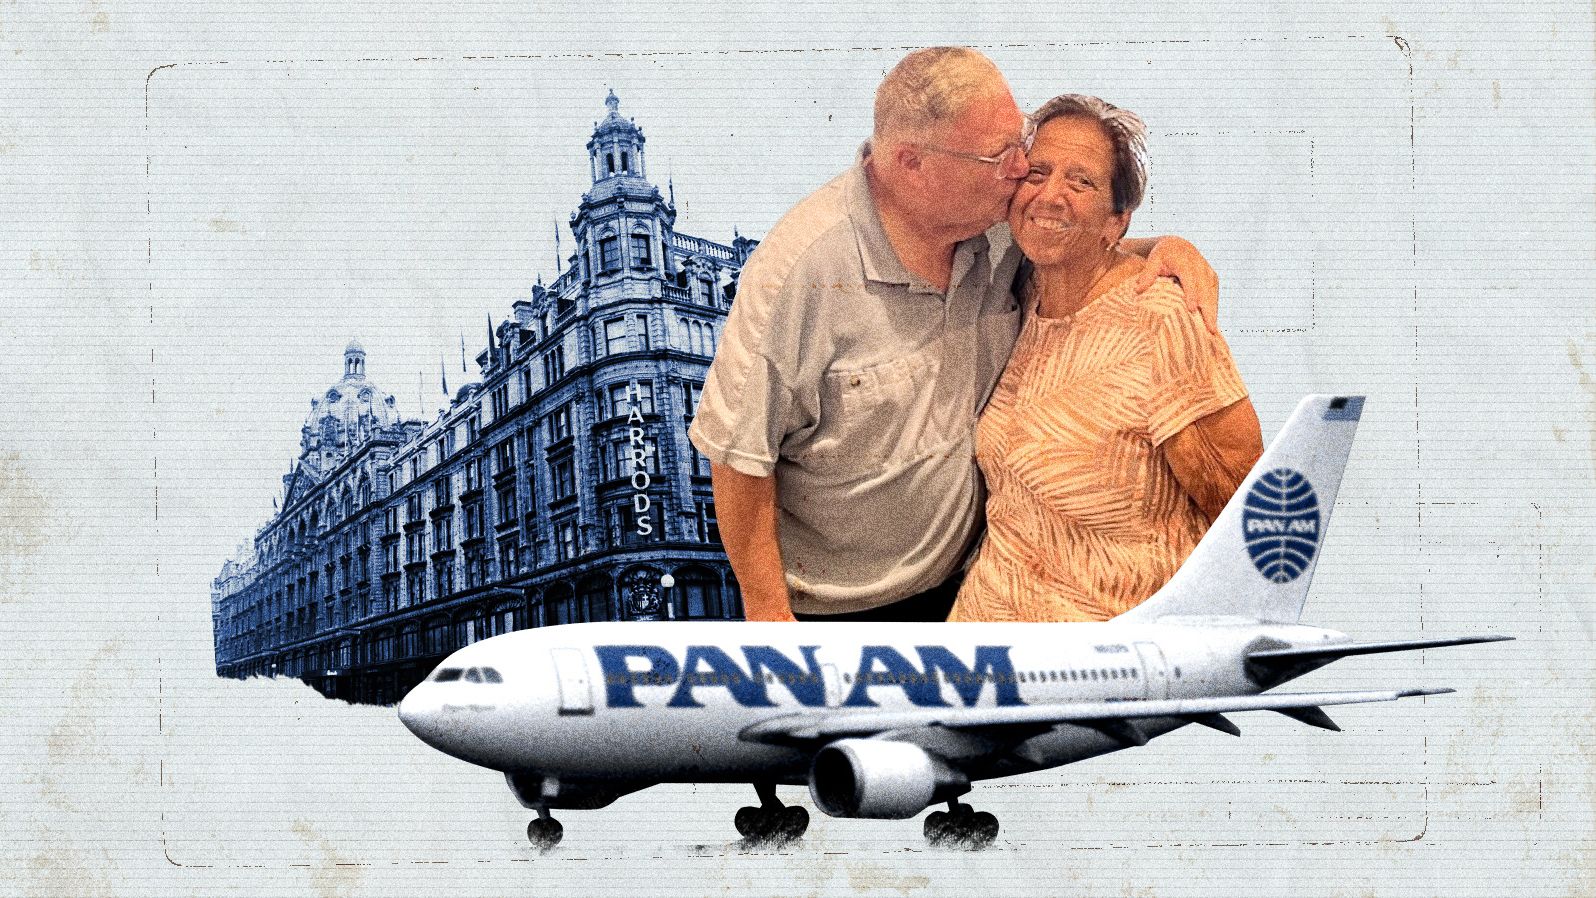 Londoner Dave Burtenshaw and American Angela Renda, who worked for Pan American World Airways, met at Harrods department store in London in 1983. Here's the couple photographed in 2023.